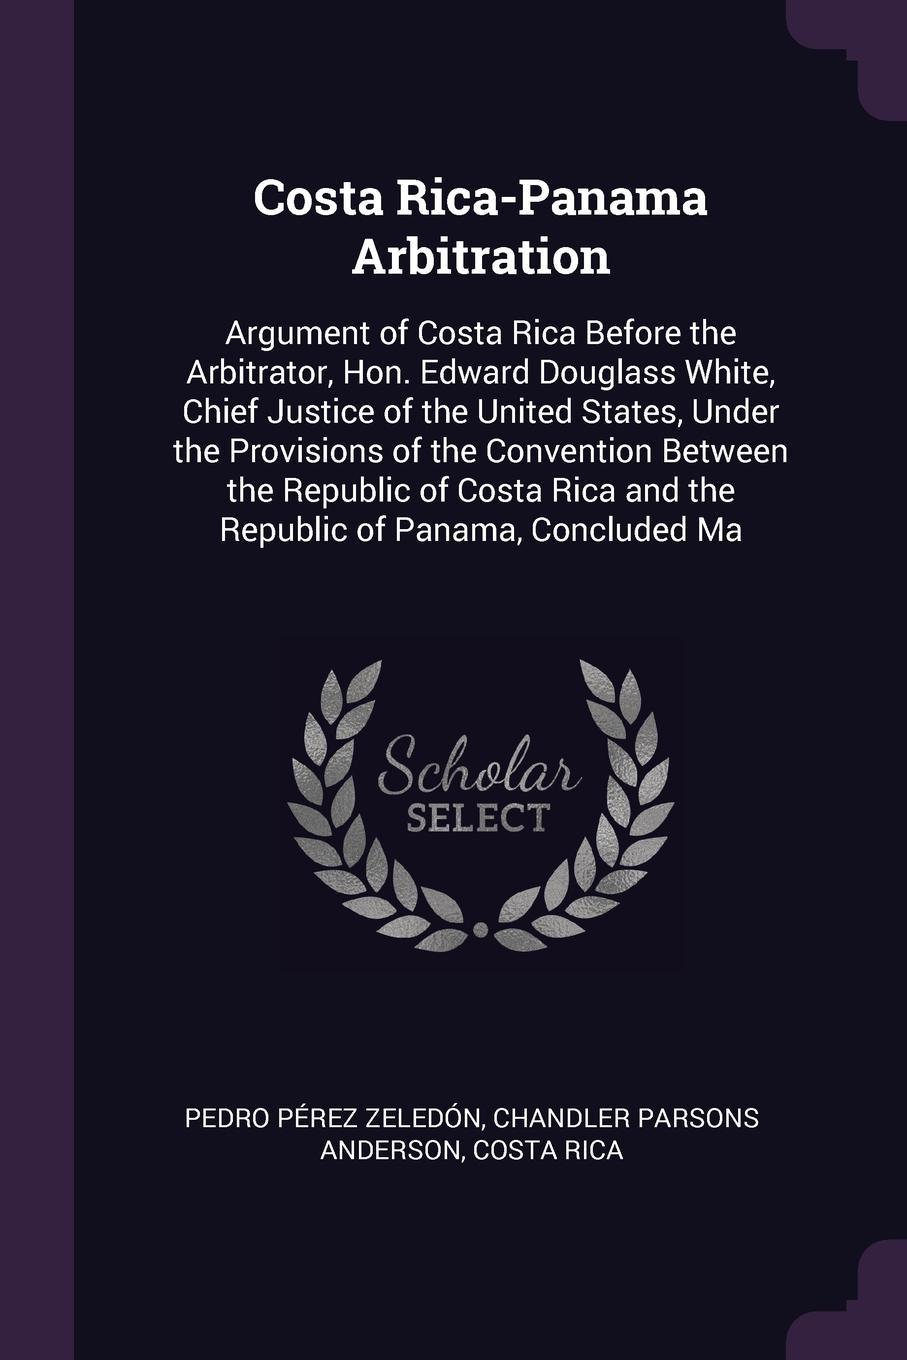 Costa Rica-Panama Arbitration. Argument of Costa Rica Before the Arbitrator, Hon. Edward Douglass White, Chief Justice of the United States, Under the Provisions of the Convention Between the Republic of Costa Rica and the Republic of Panama, Conc...